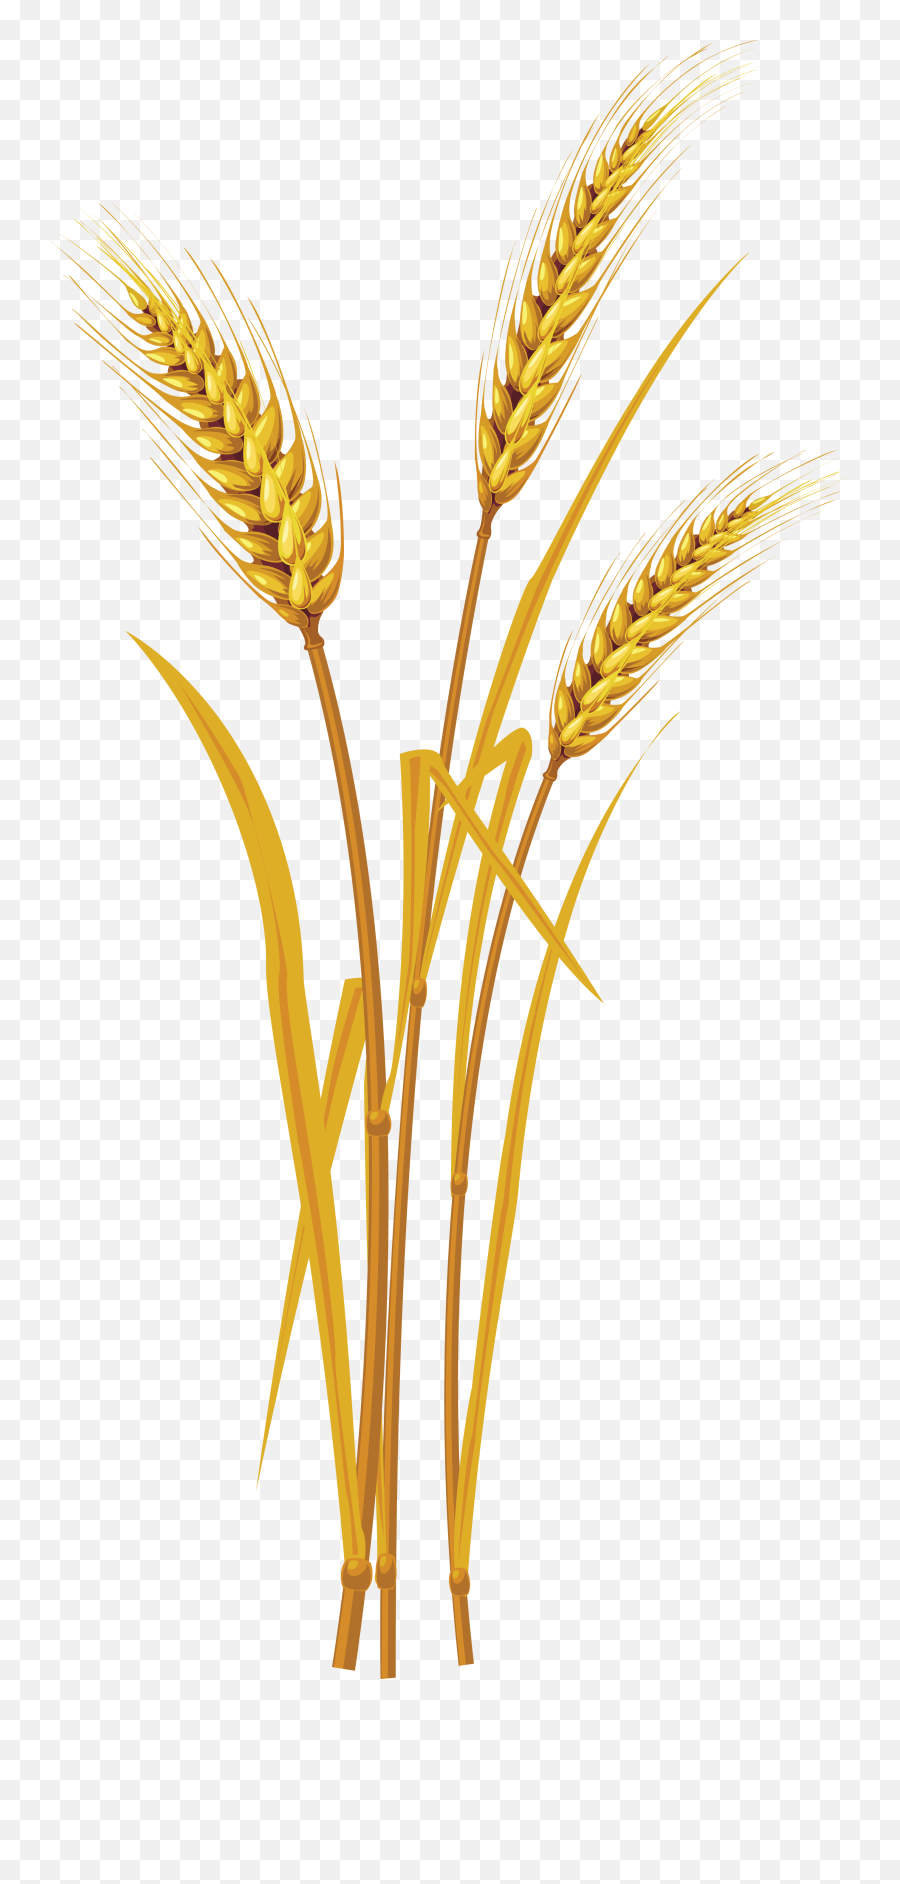 Download Wheat Png Image With No Transparent Background